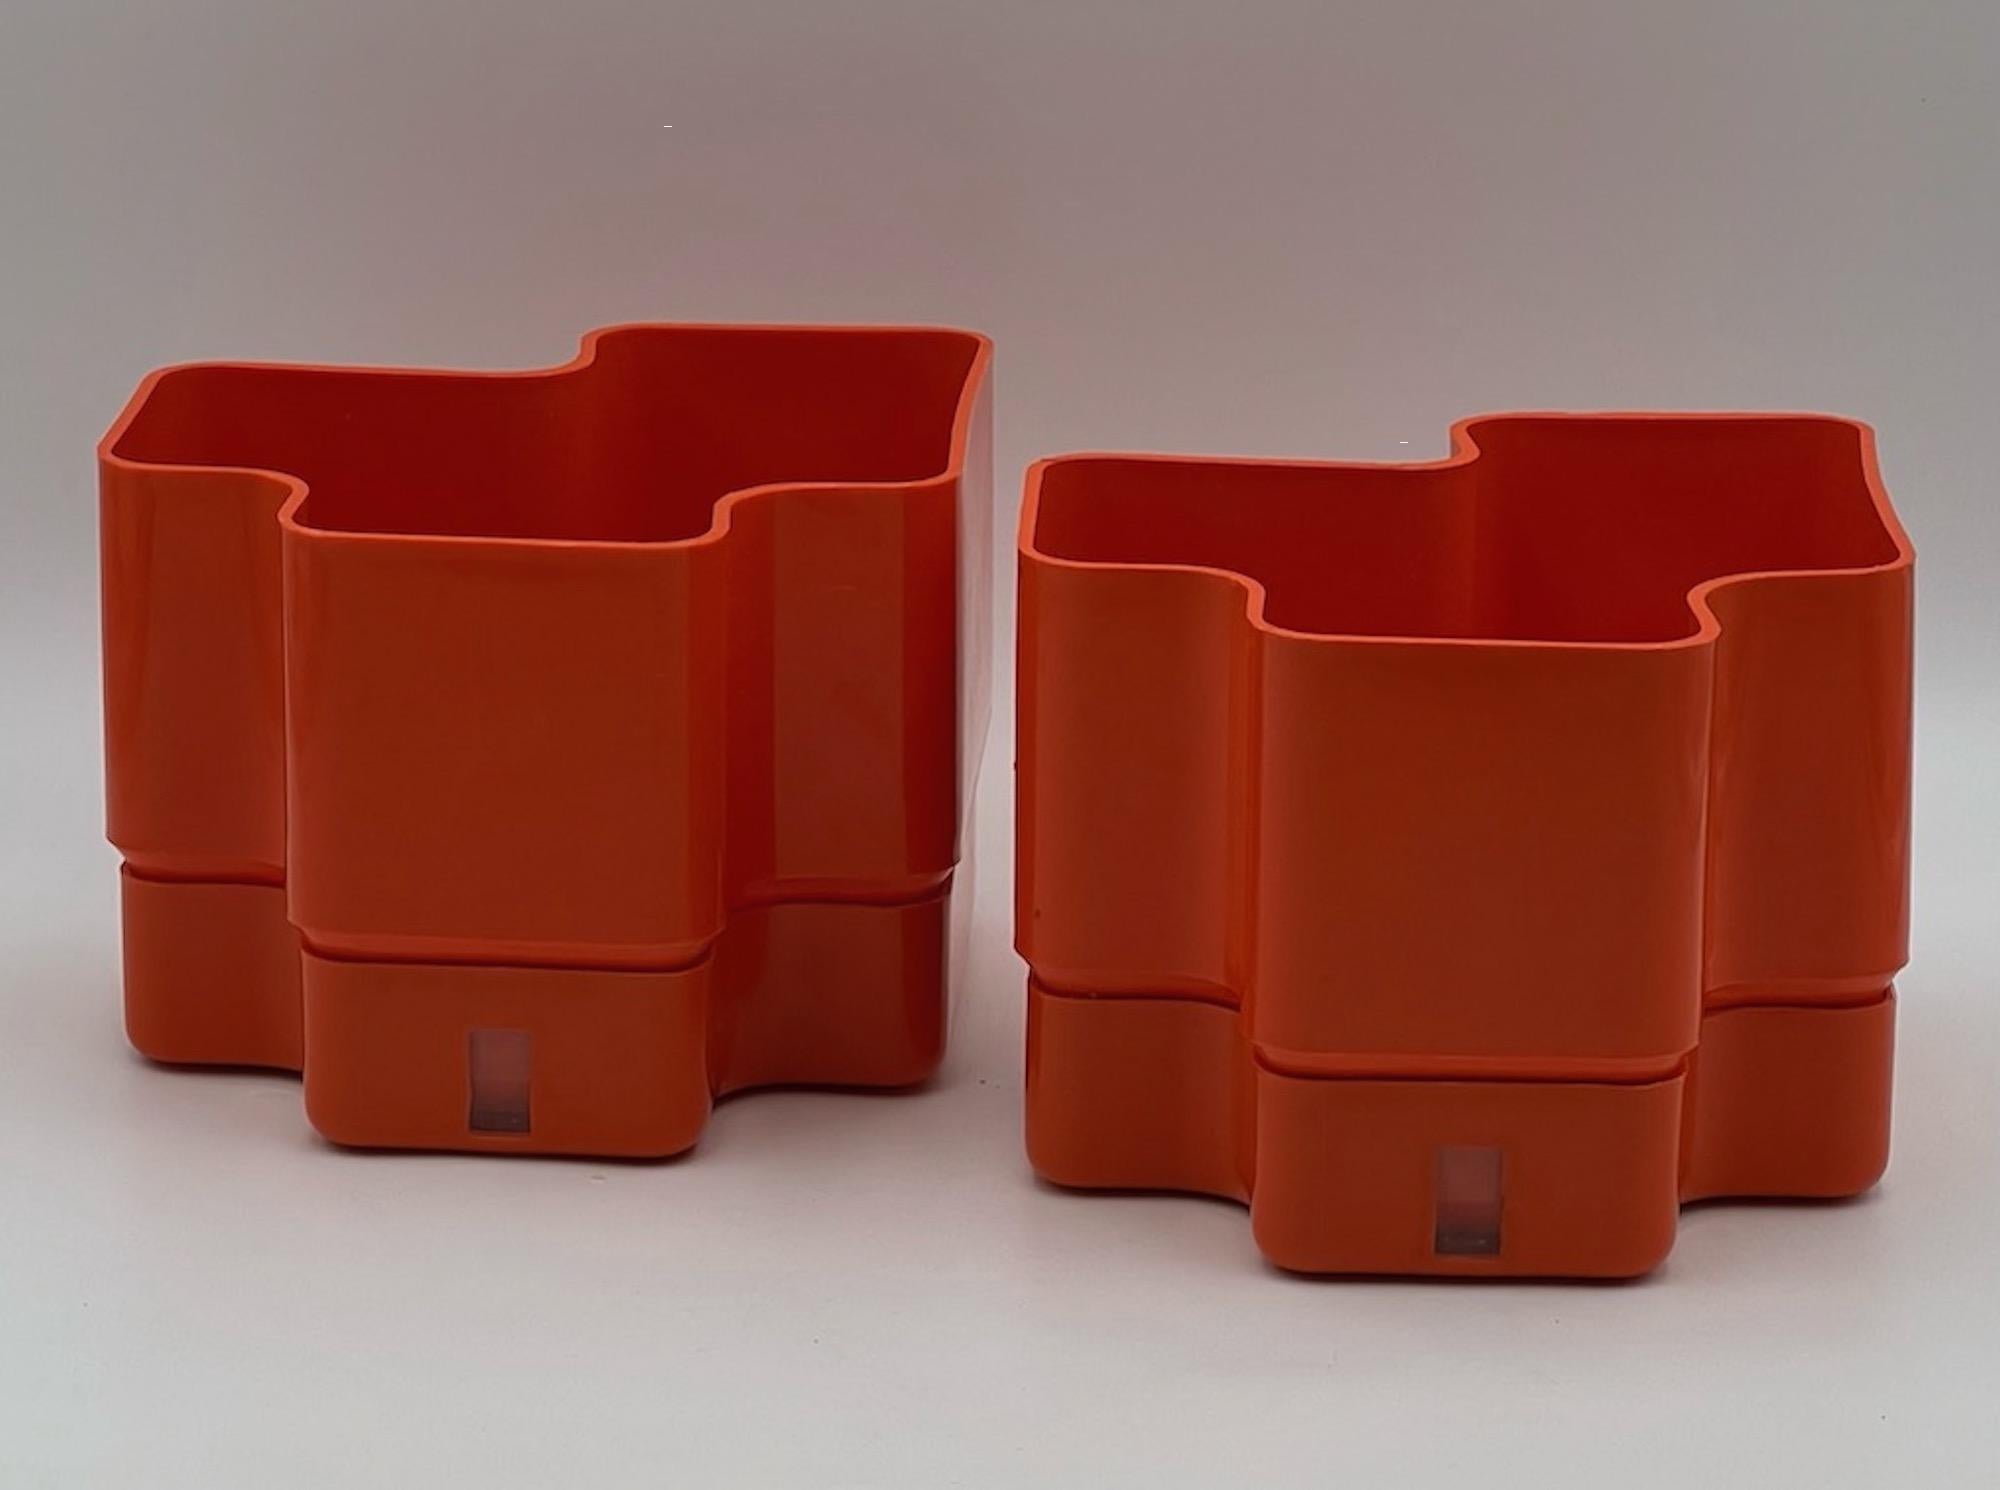  Space Age Plastic Planters by Programma Vastill, 1970s, Set of 2 For Sale 3